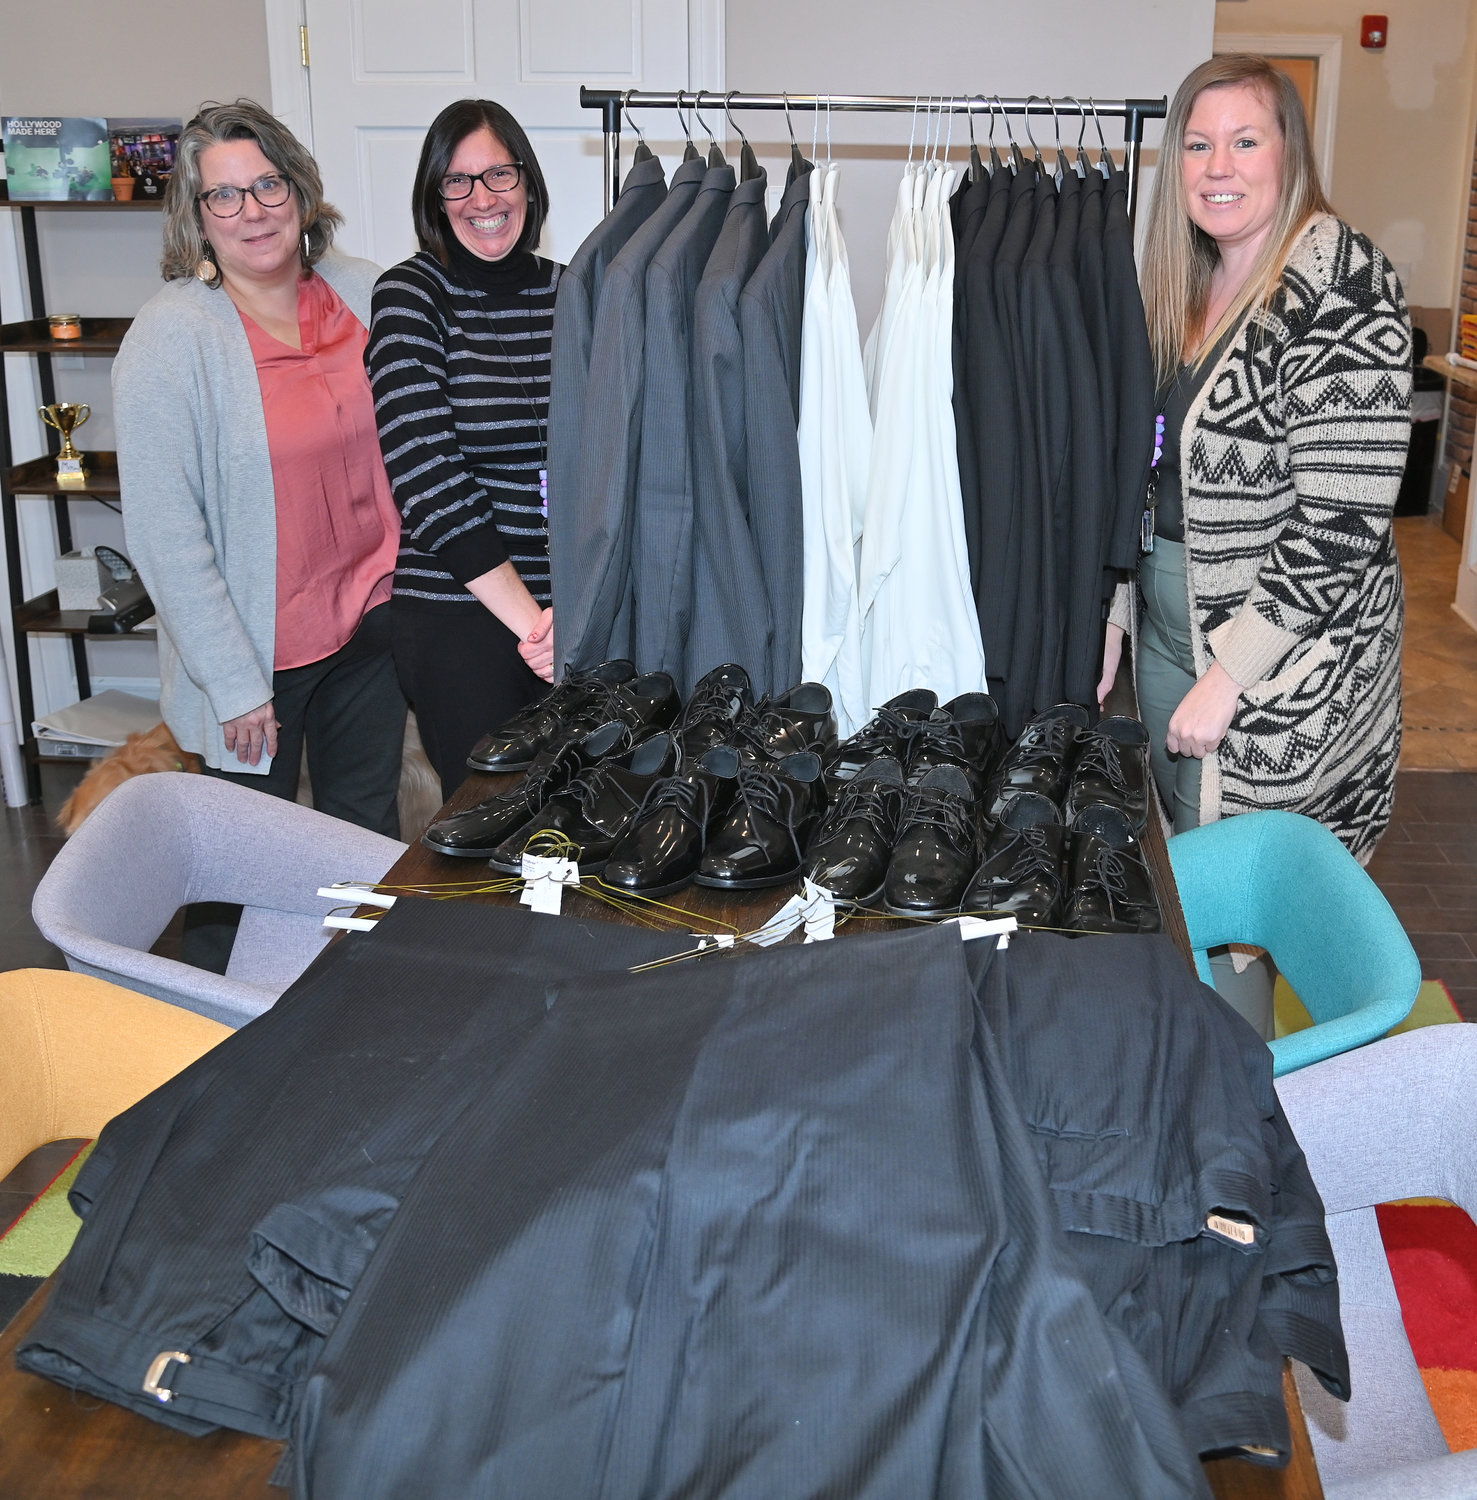 Community Connected Schools recently received donated tuxedos from A Vitullo in New Hartford and they are almost ready to go to the prom. From left are Sarah Smith, project manager from Holland Patent; Kim Streates from the middle school and Amanda Steele, site coordinator from Holland Patent High School.